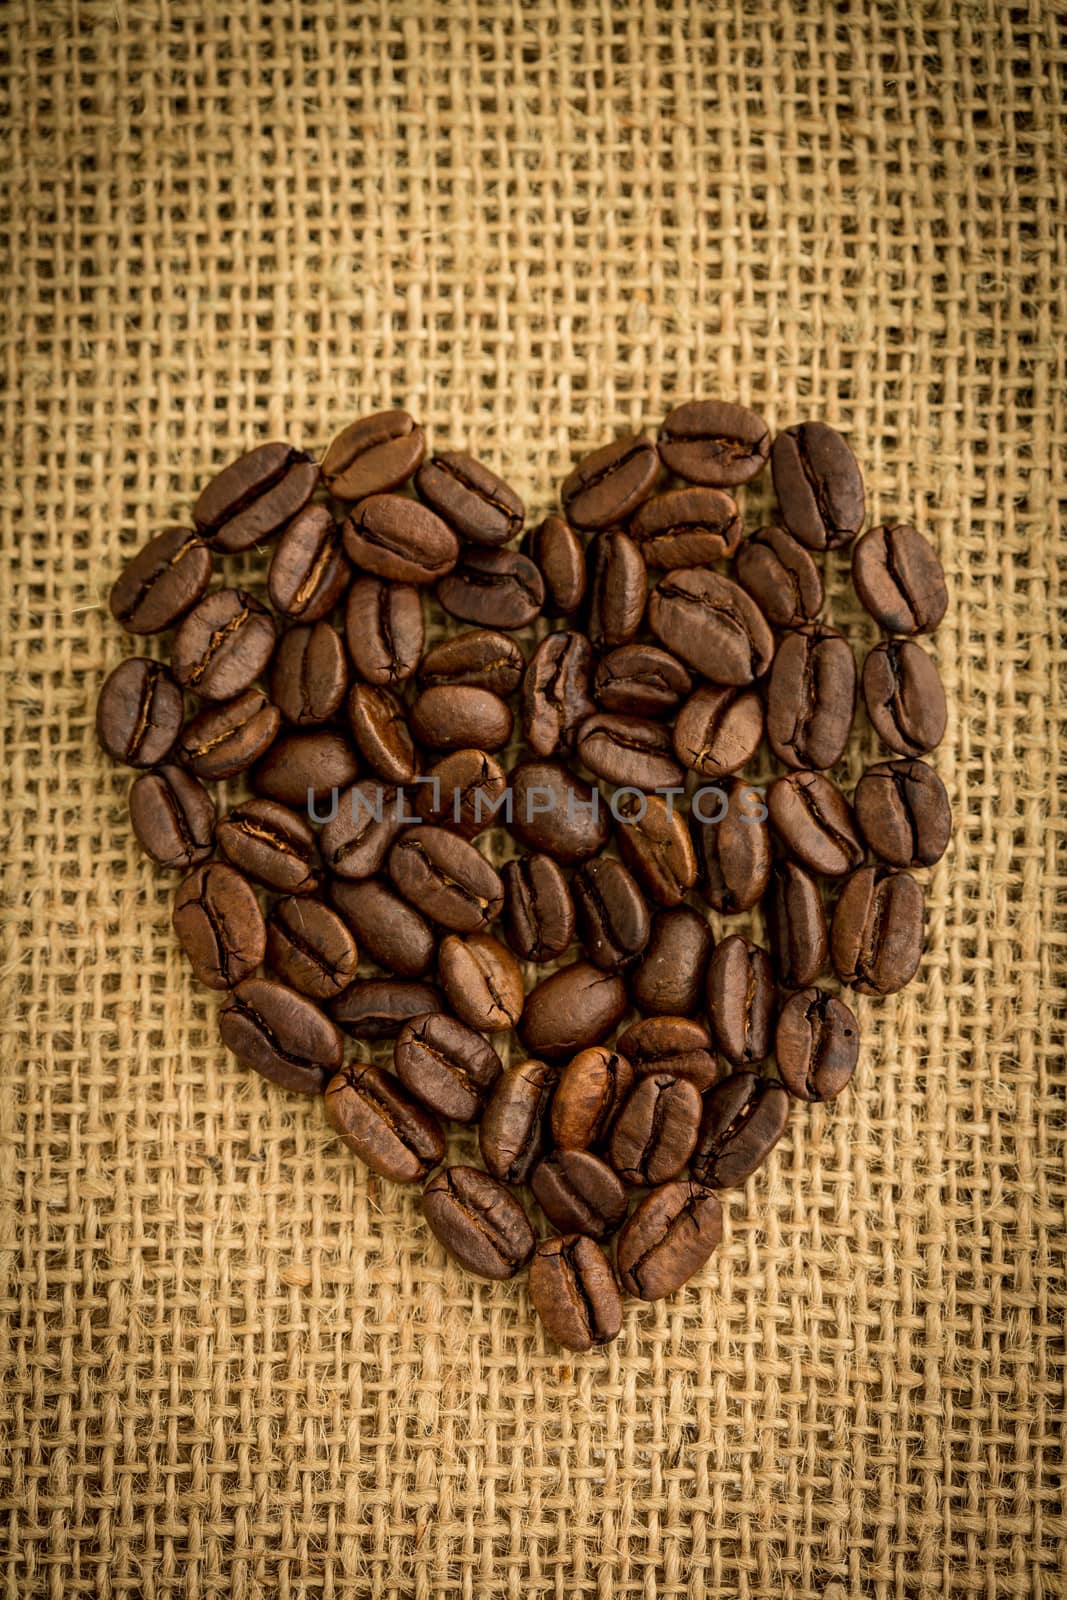 Heart made from roasted coffee beans by Wavebreakmedia